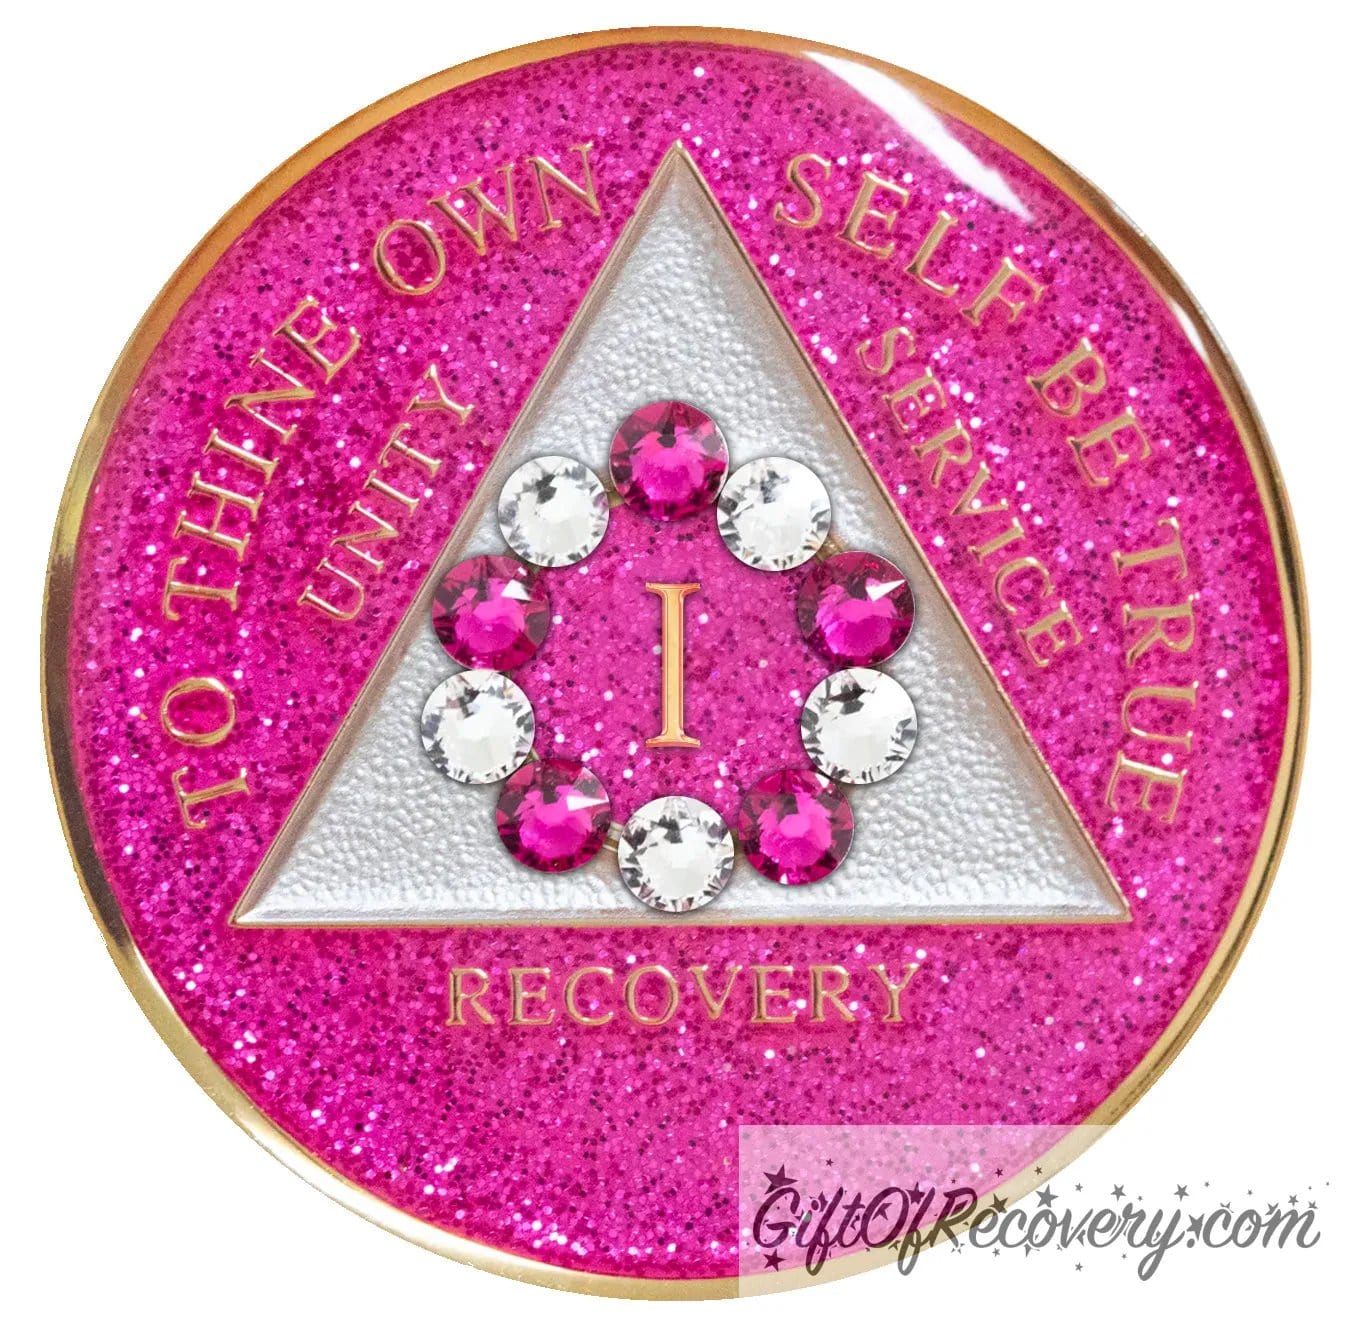 1 Year princess pink glitter 10th step AA medallion with 5 pink genuine crystals and 5 clear genuine crystal, formed in a circle around the year, to thine own self be true, triangle in the center and unity, service, recovery, along with rim of medallion are slightly raised in 14k gold, the center of the triangle is pearl white with the circle being pink glitter, all emphasizing action and reflection, for your favorite sober princess.